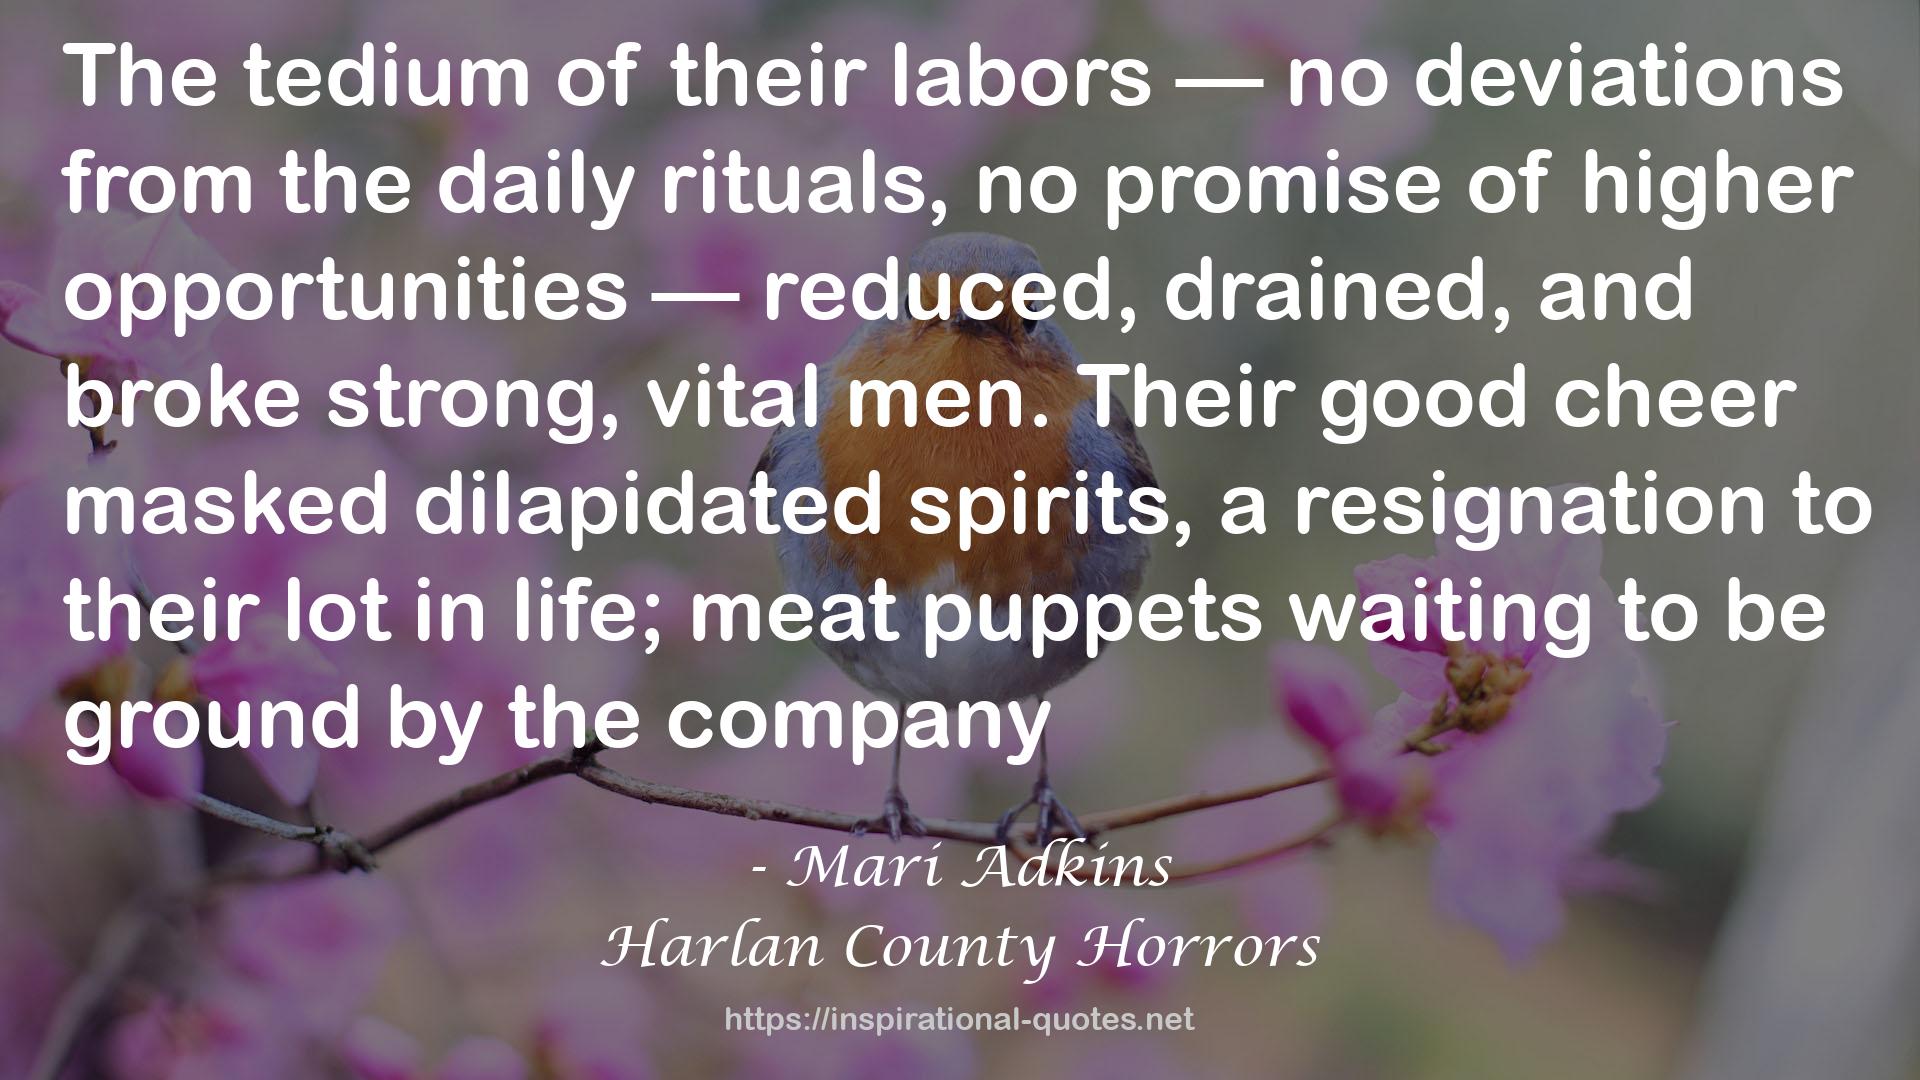 Harlan County Horrors QUOTES